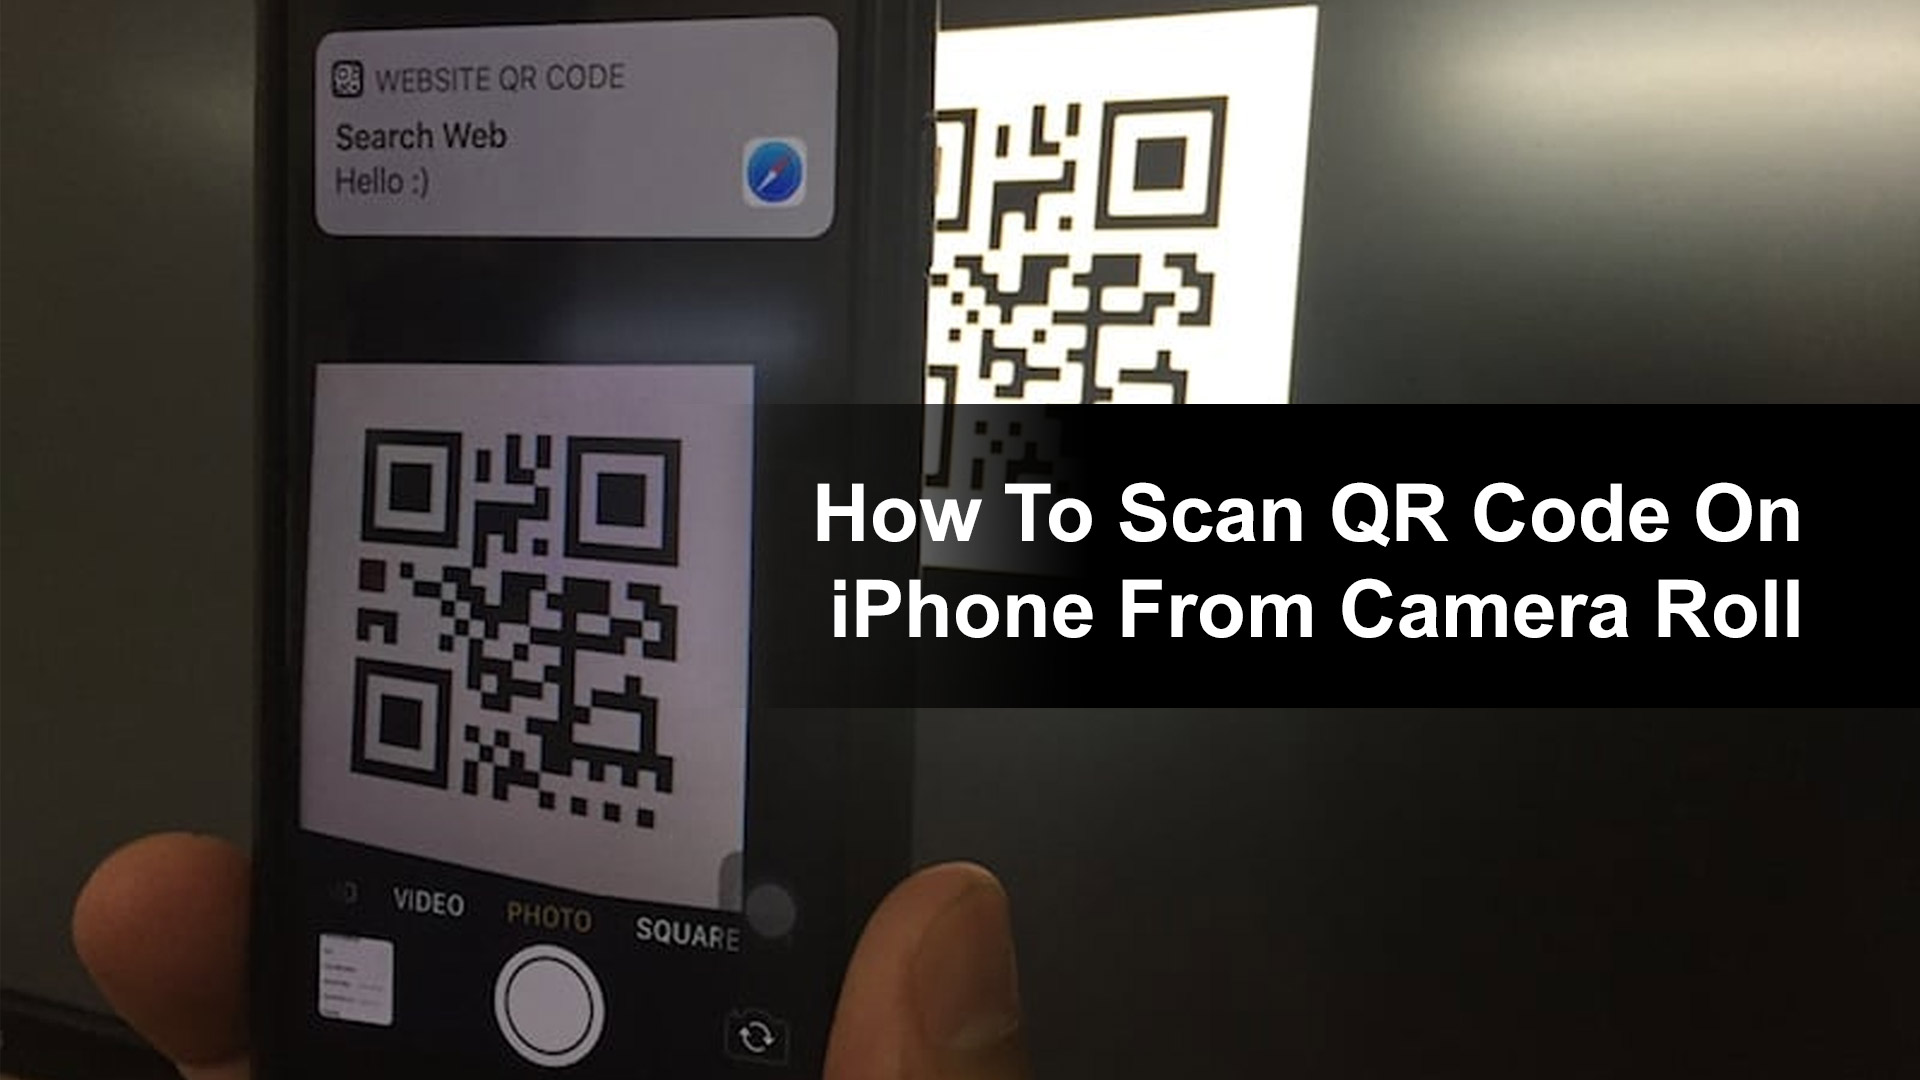 How To Scan QR Code On iPhone From Camera Roll